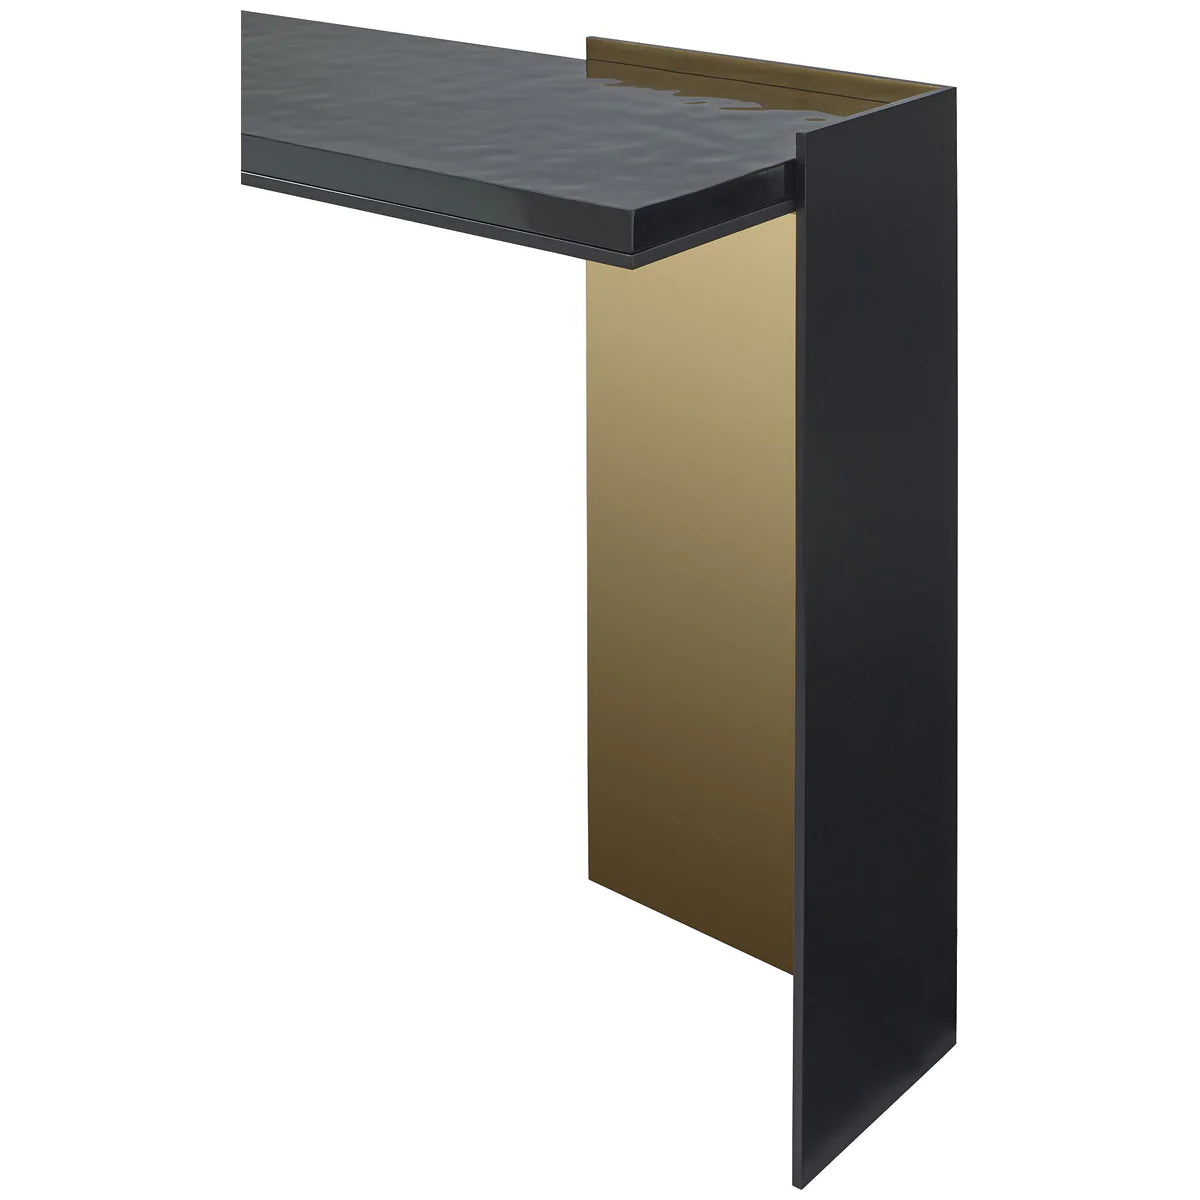 Baker Furniture Wrap Console Table MR7065, Lacquer